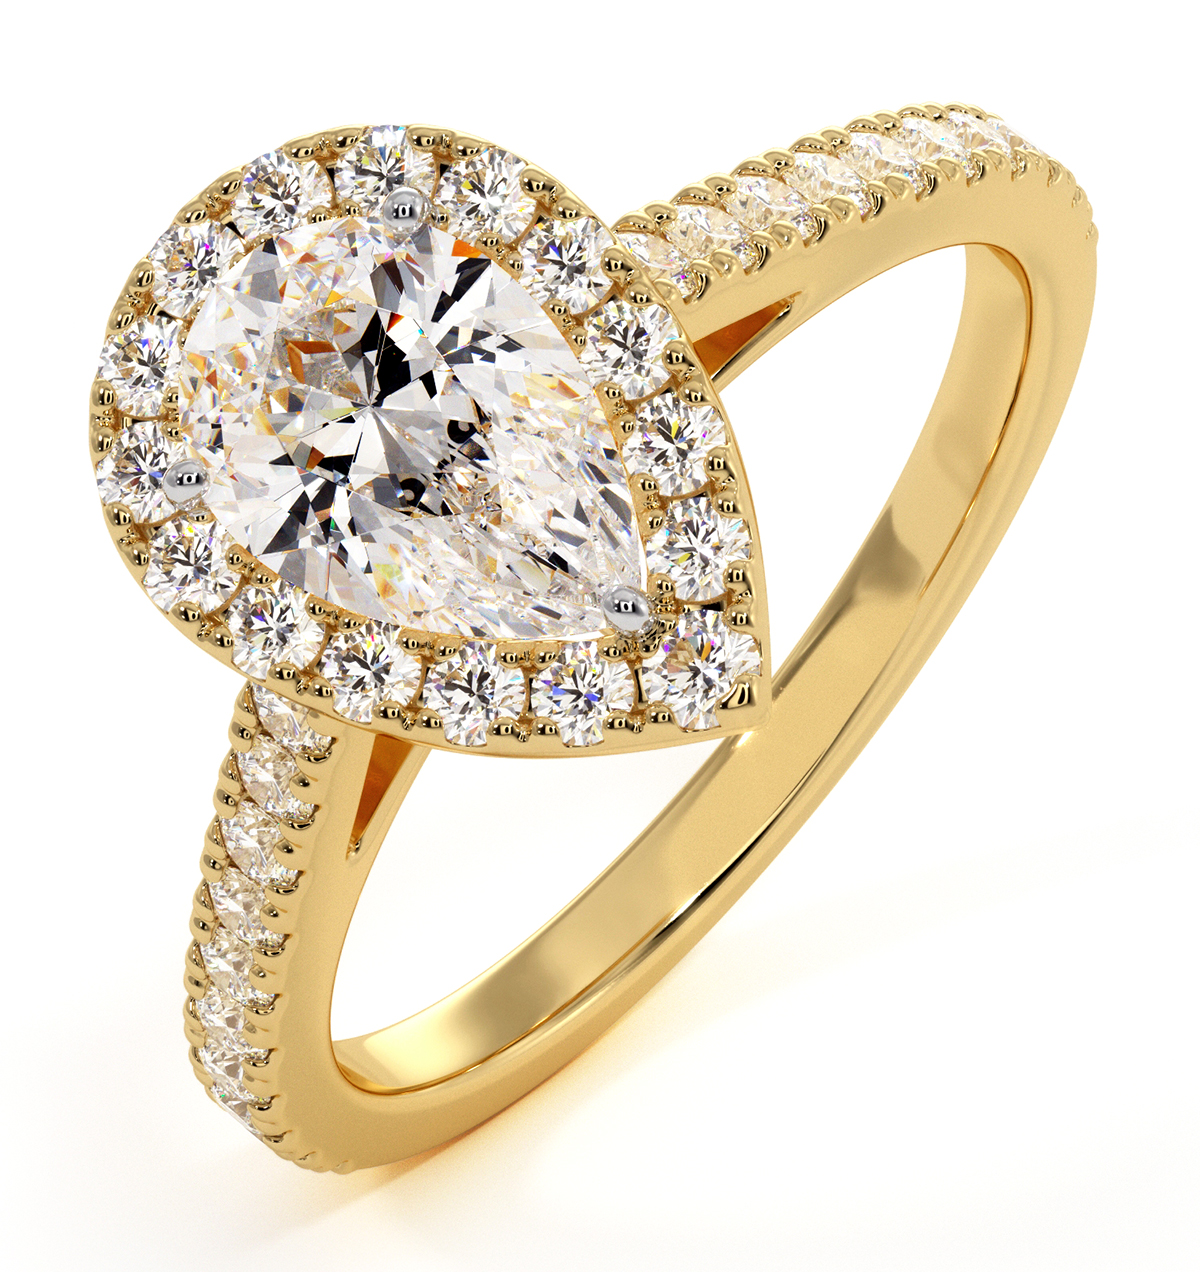 Diana GIA Diamond Pear Halo Engagement Ring in 18K Gold 1.35ct G/SI2 - image 1